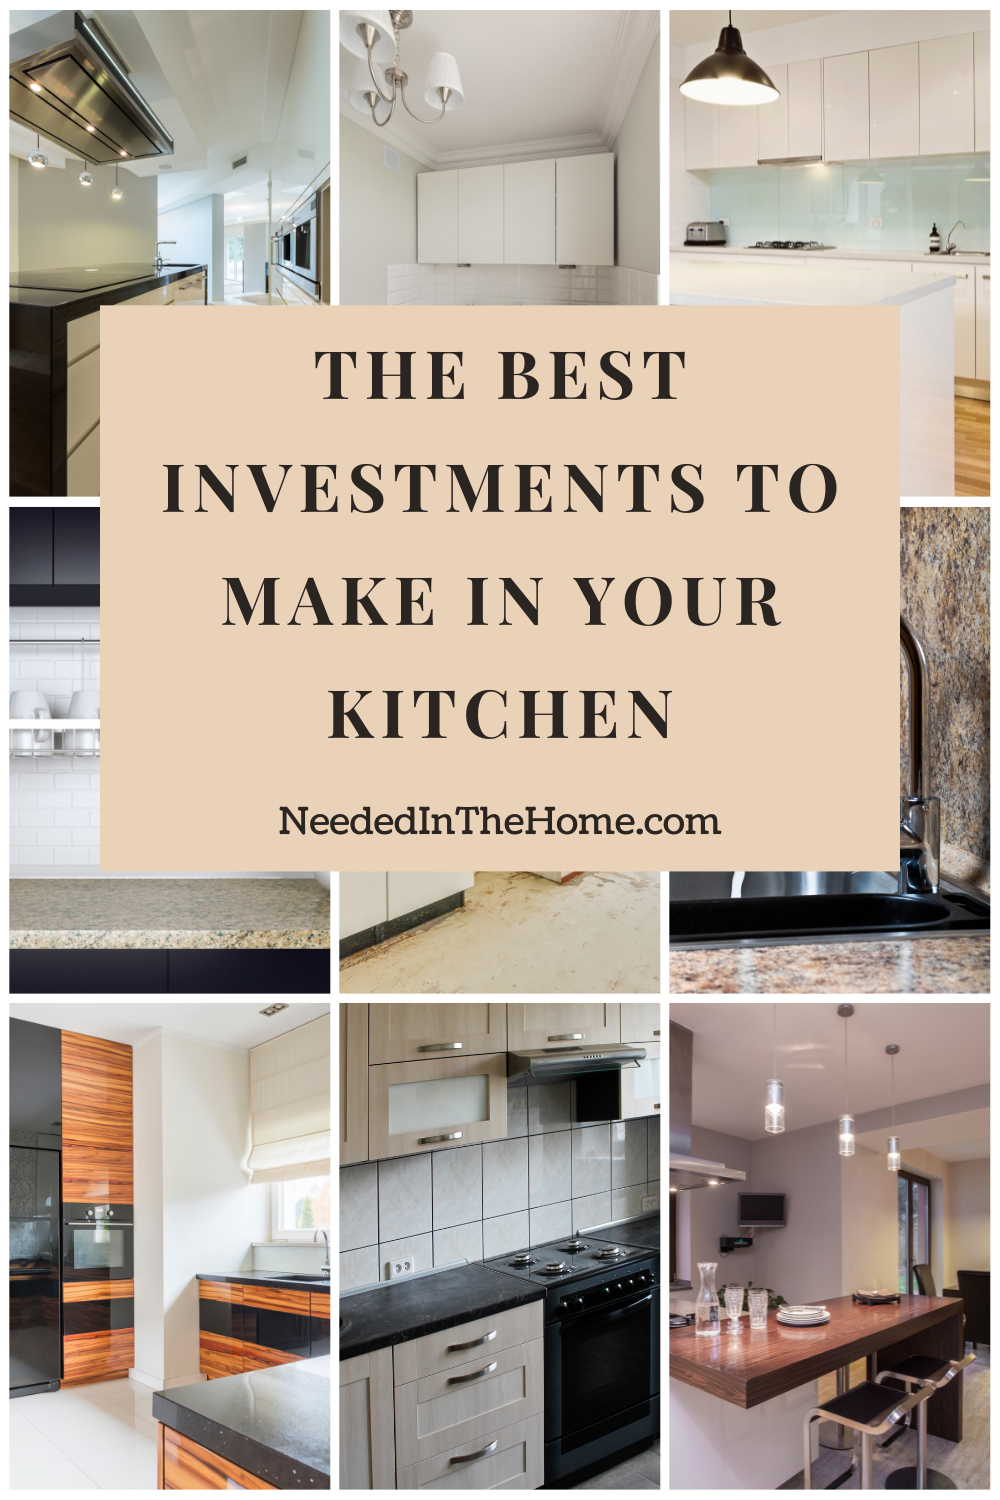 pinterest-pin-description the best investments to make in your kitchen nine example photos of kitchen upgrades in worktop counters cupboards sinks stovetops neededinthehome